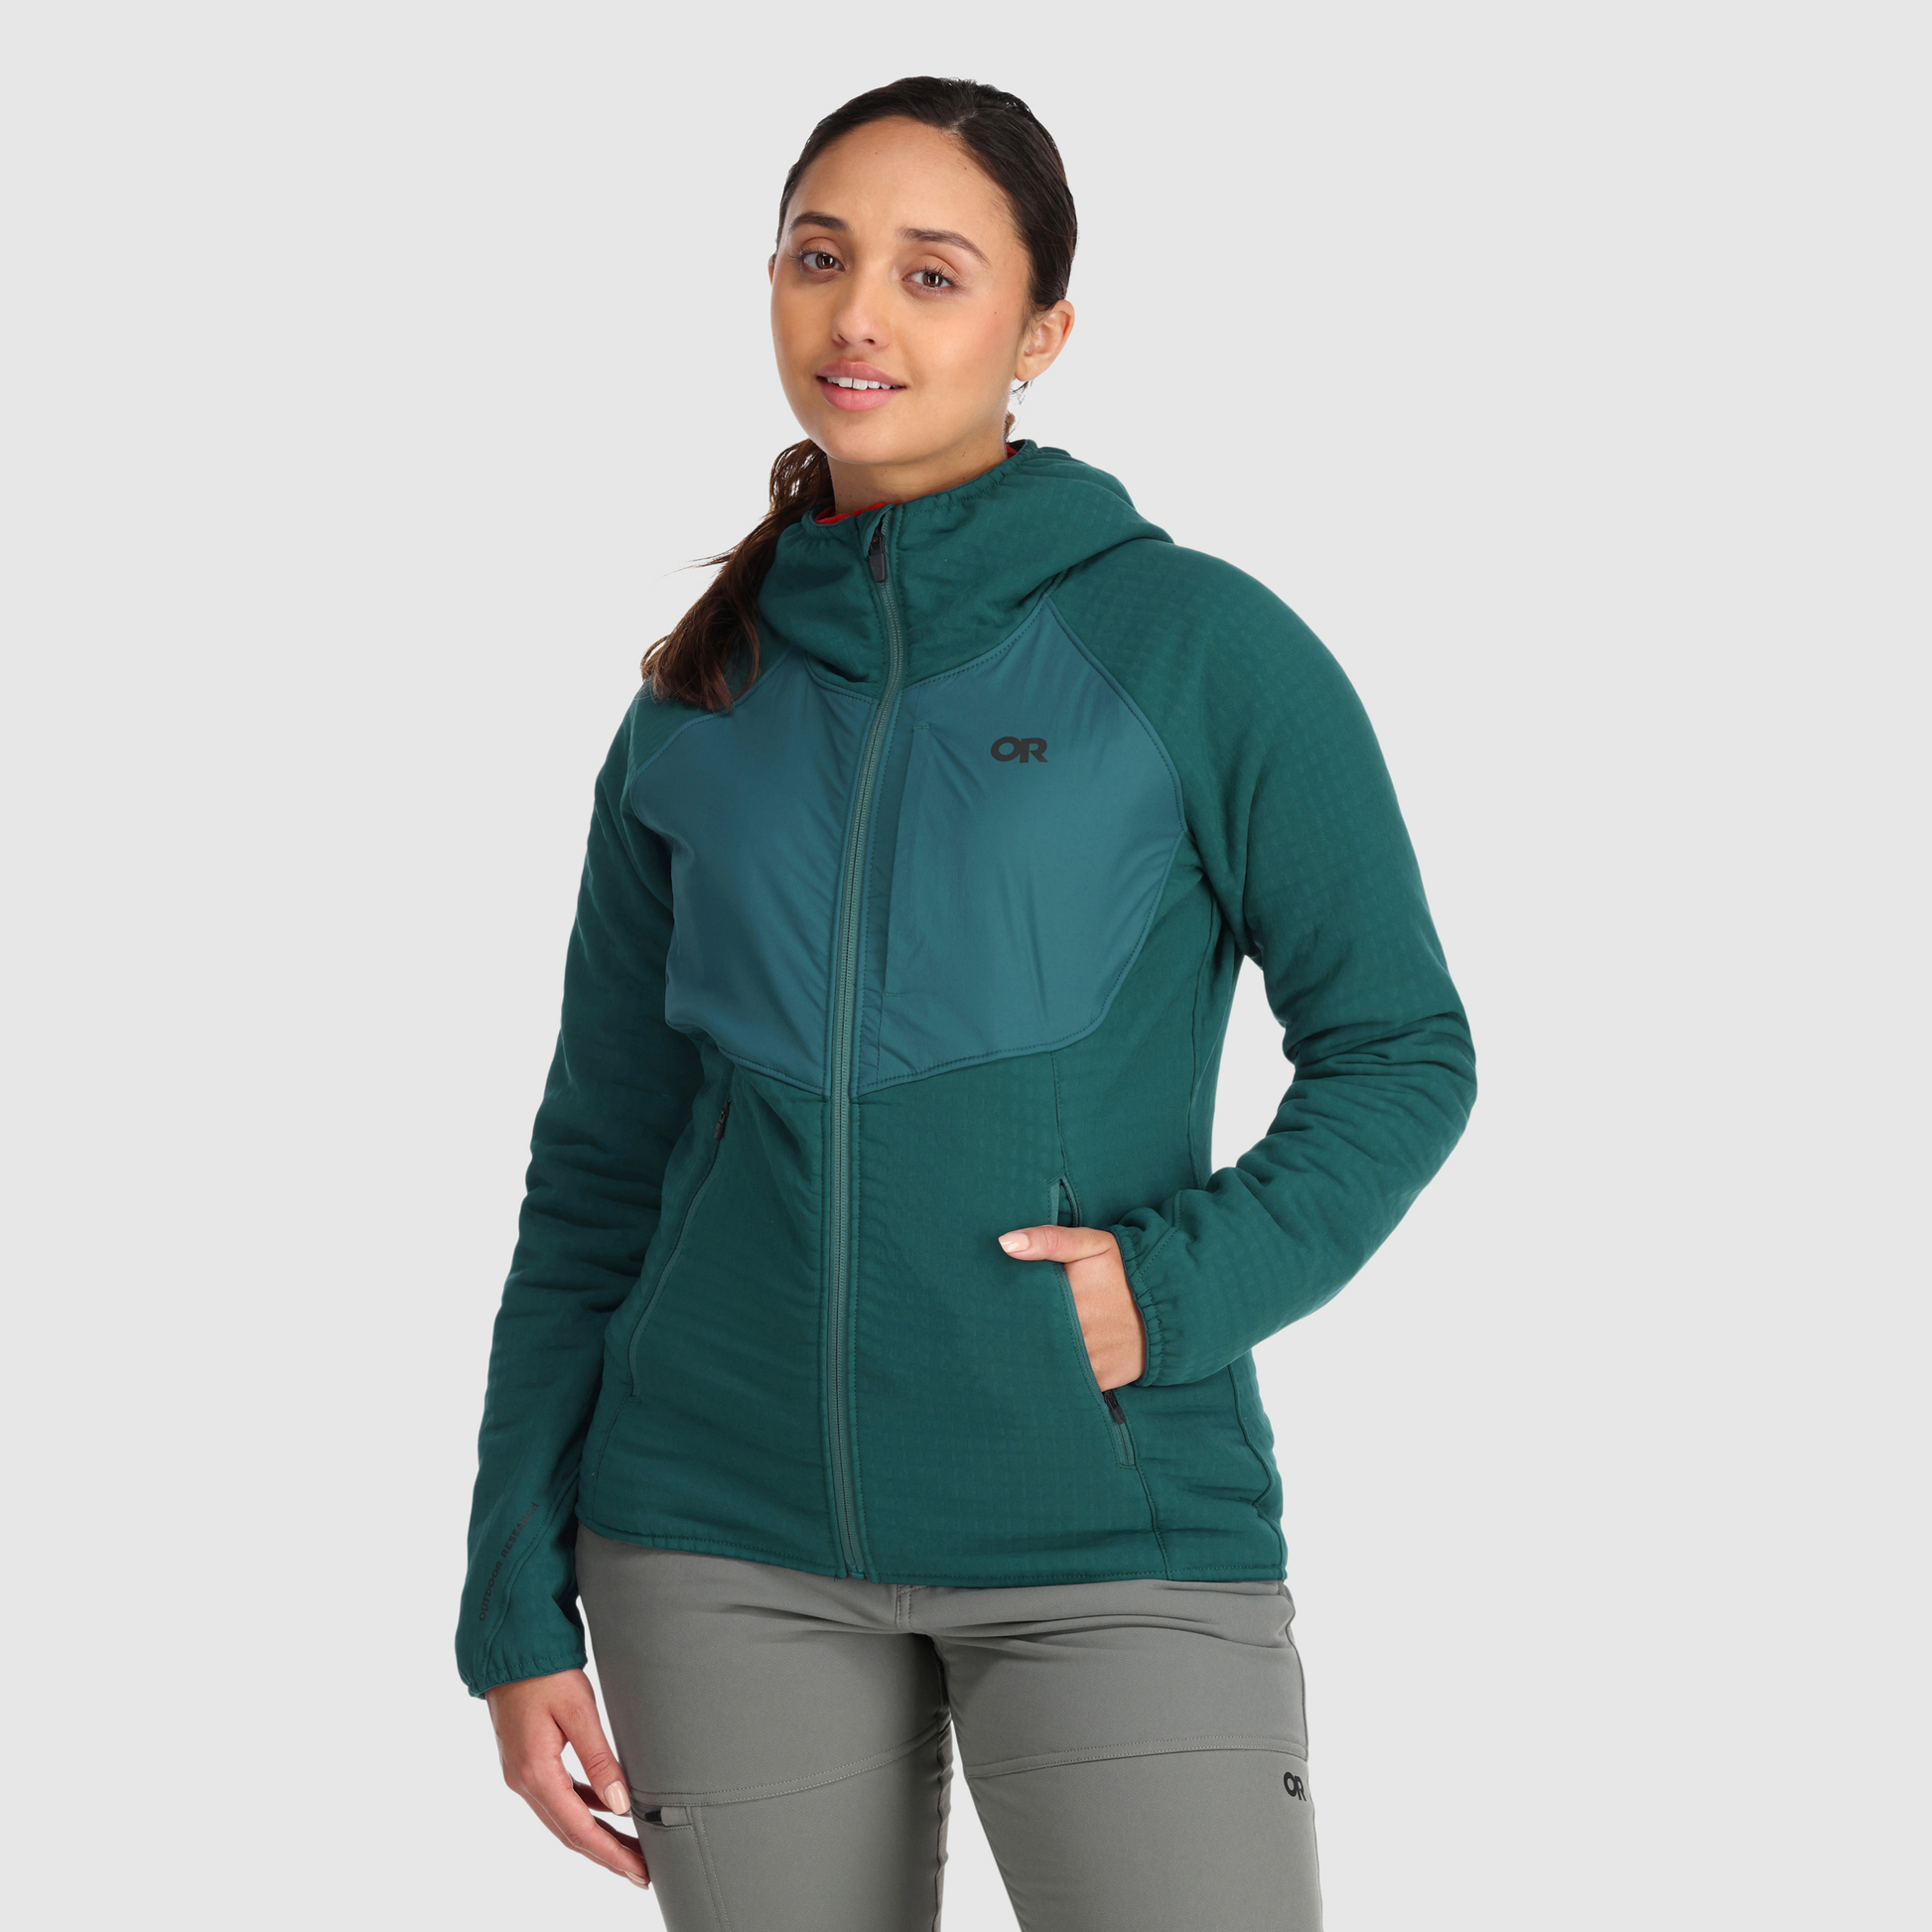 Women's Zip Up Travel Hoodies with Tons of Inside Pockets